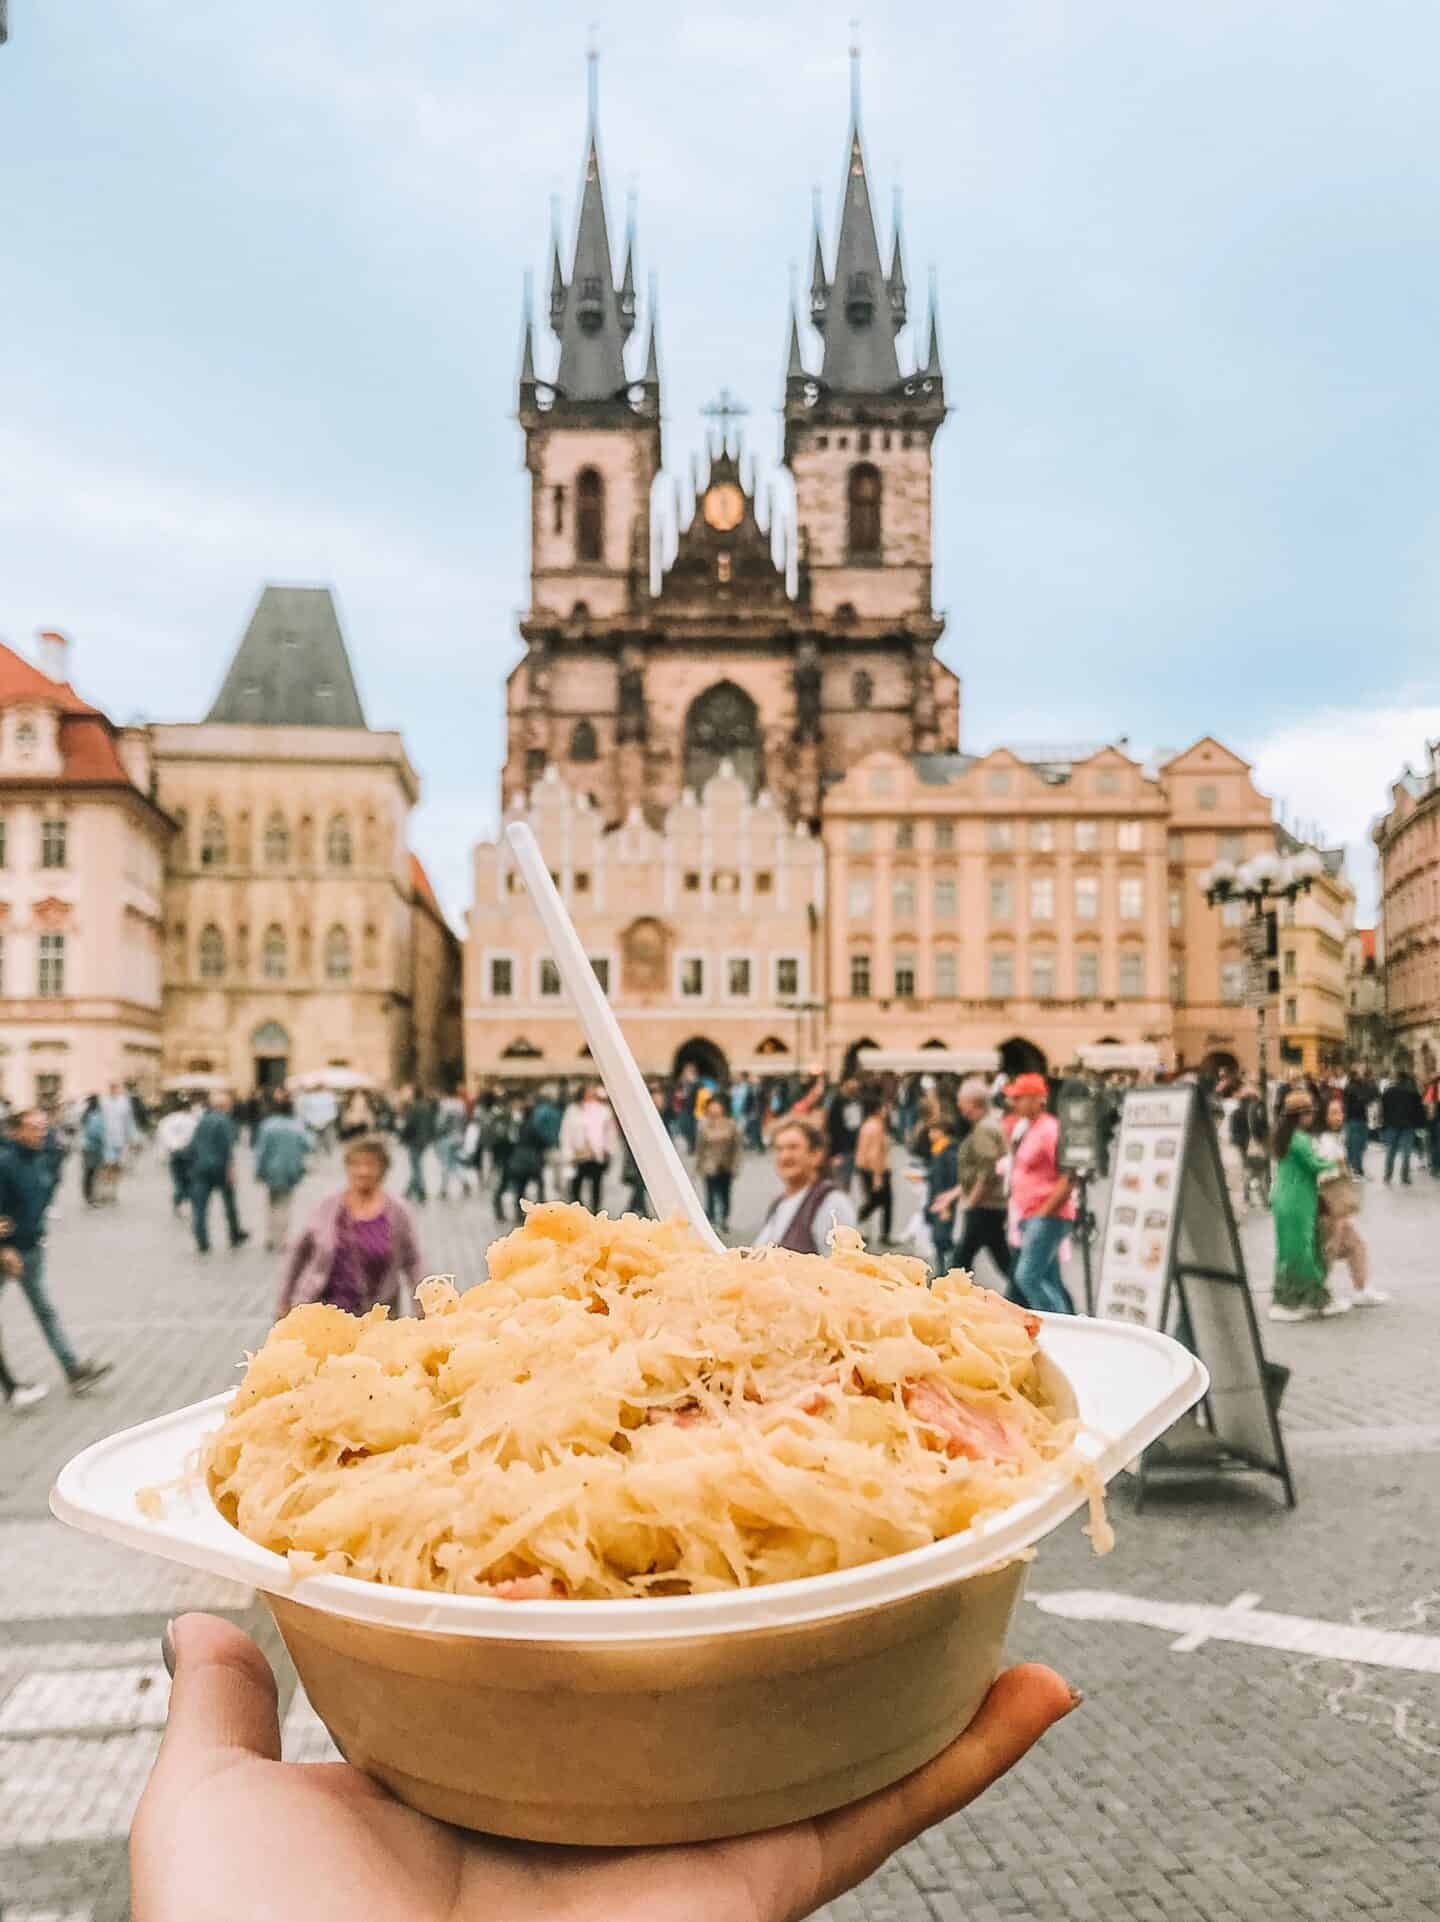 Eating a heaping bowl of halusky from a street vendor is a must-add to your 4 days in Prague itinerary